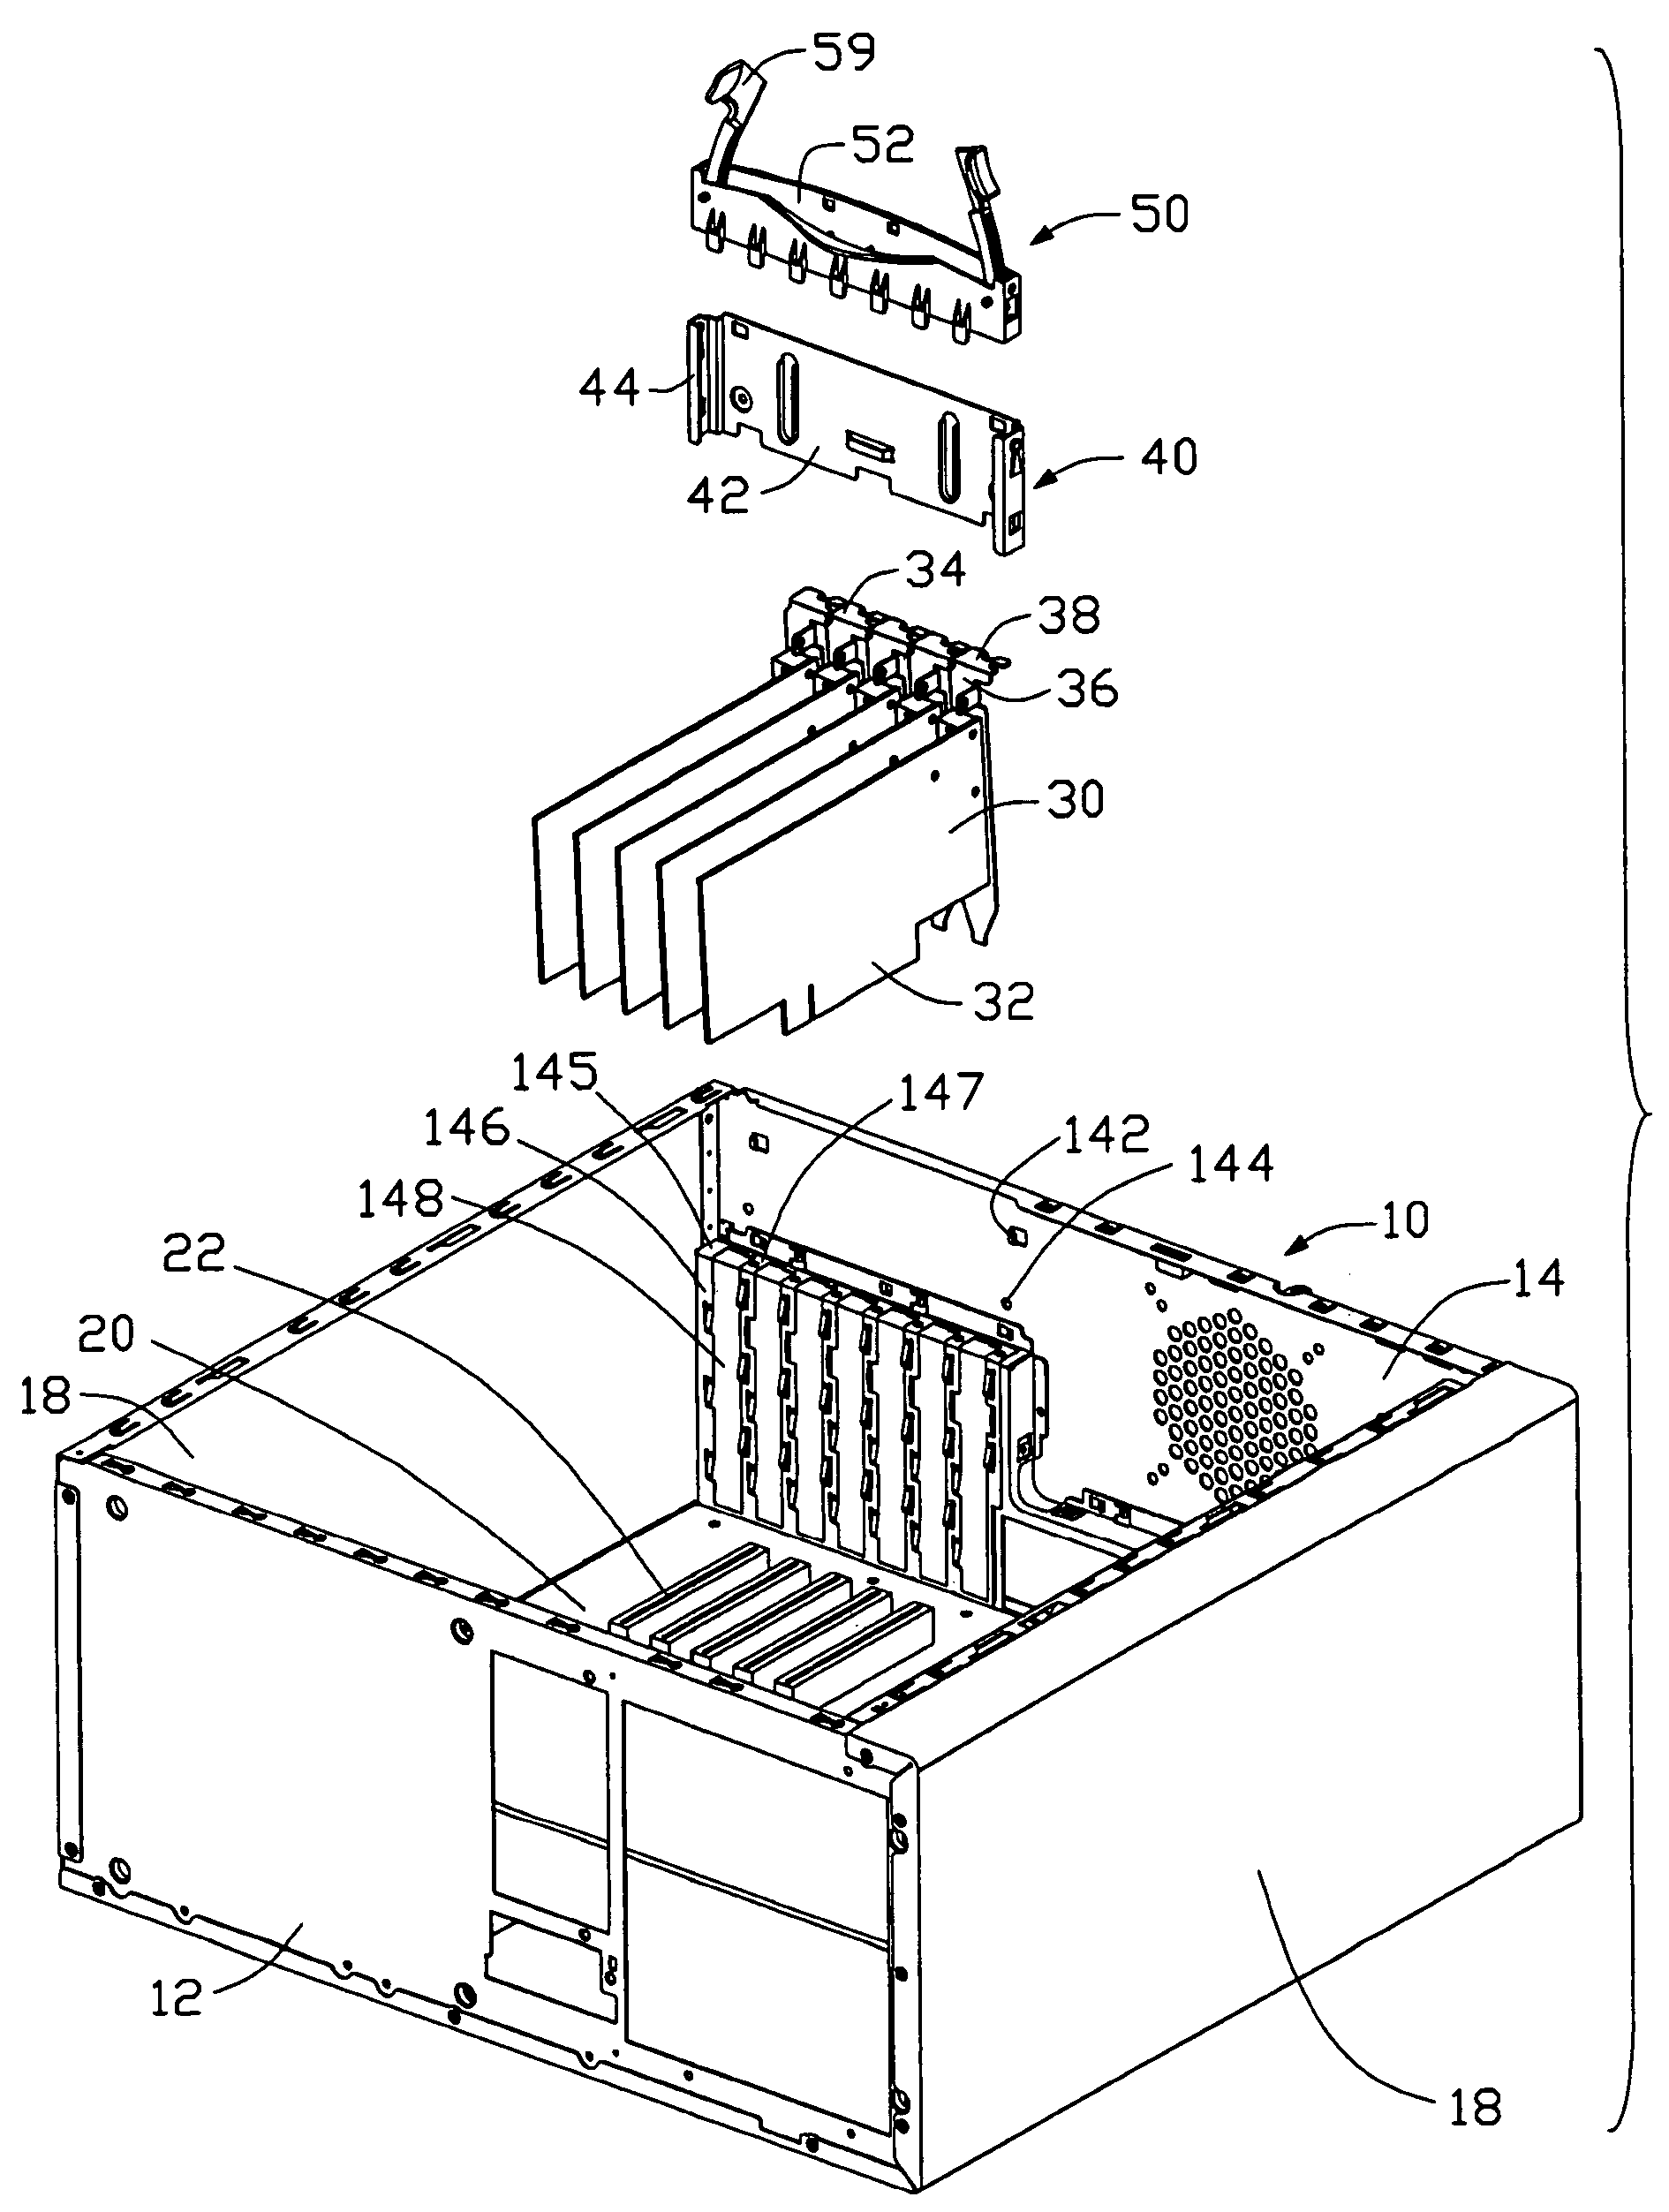 Mounting apparatus for expansion cards